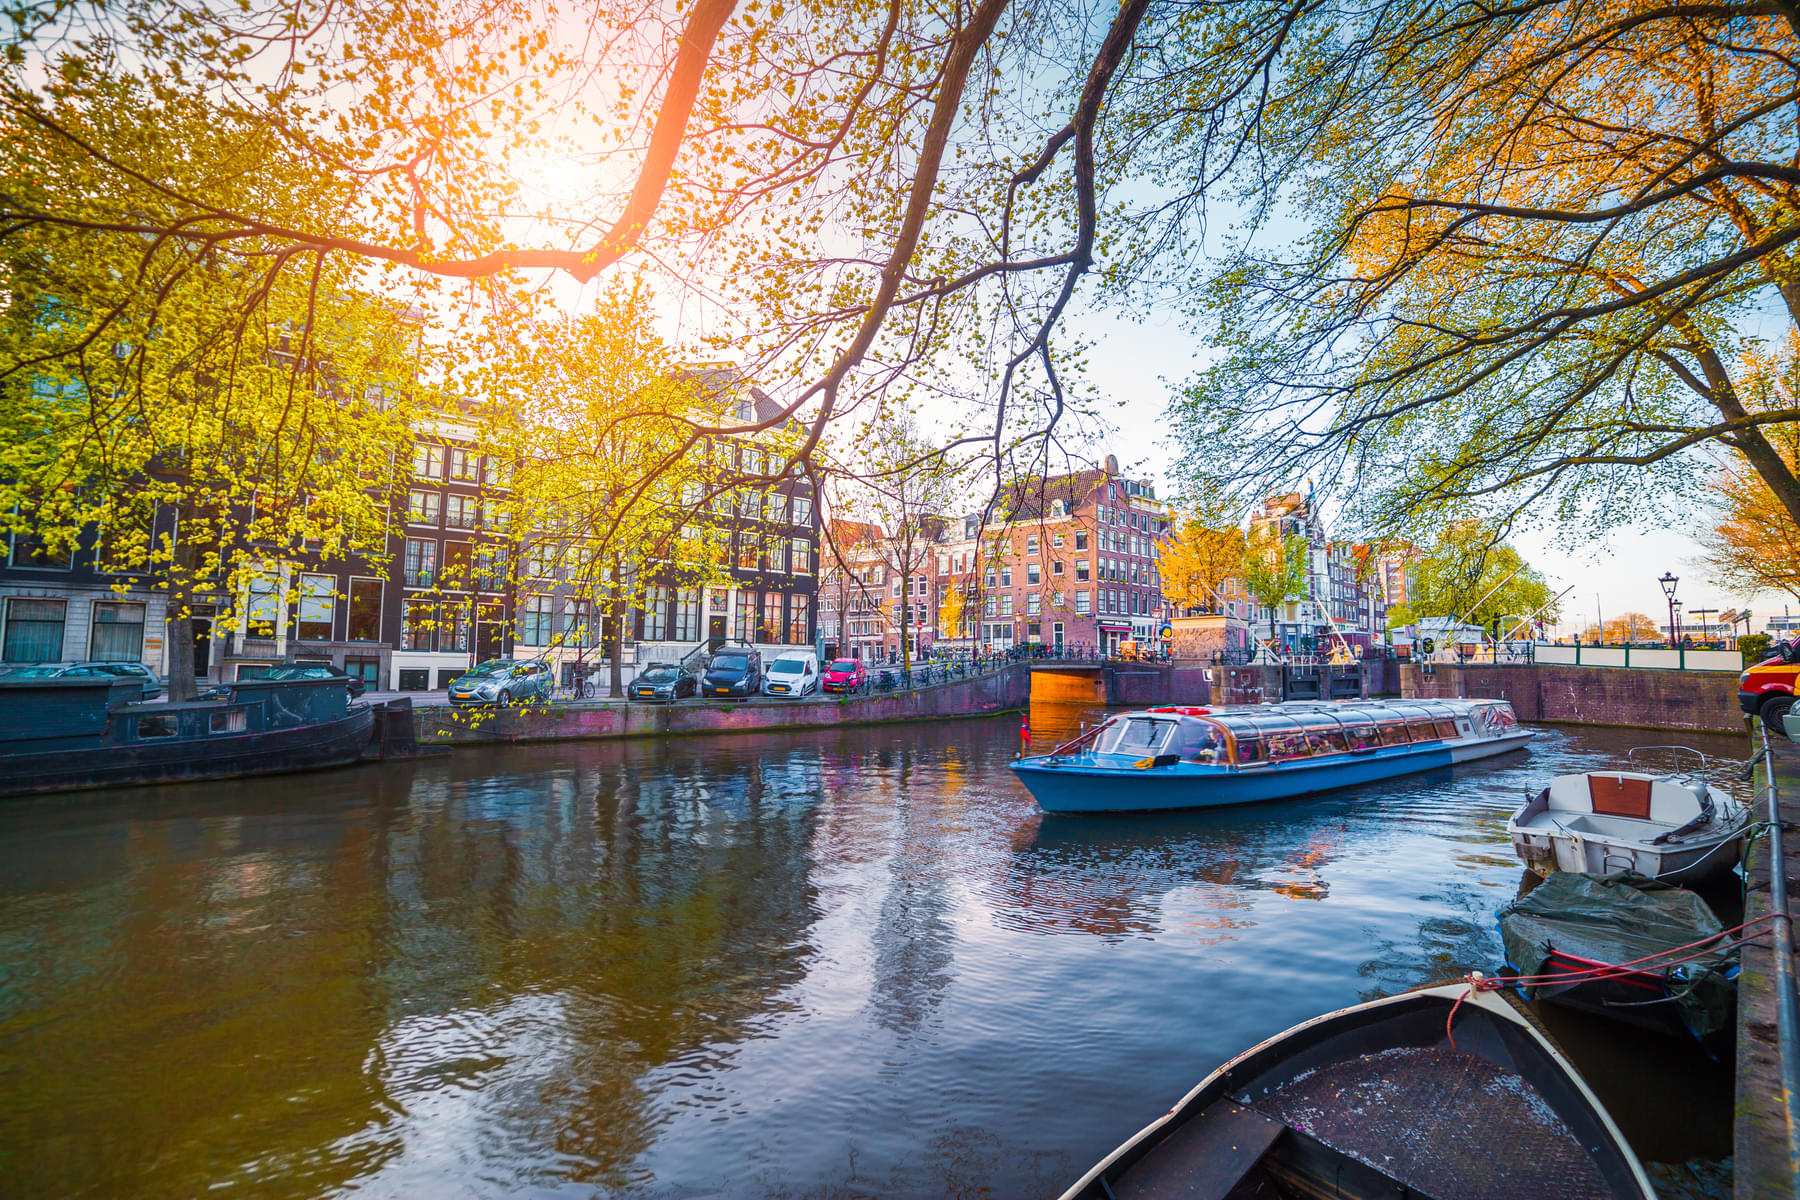 Have an enthralling Canal Cruise Experience in Amsterdam